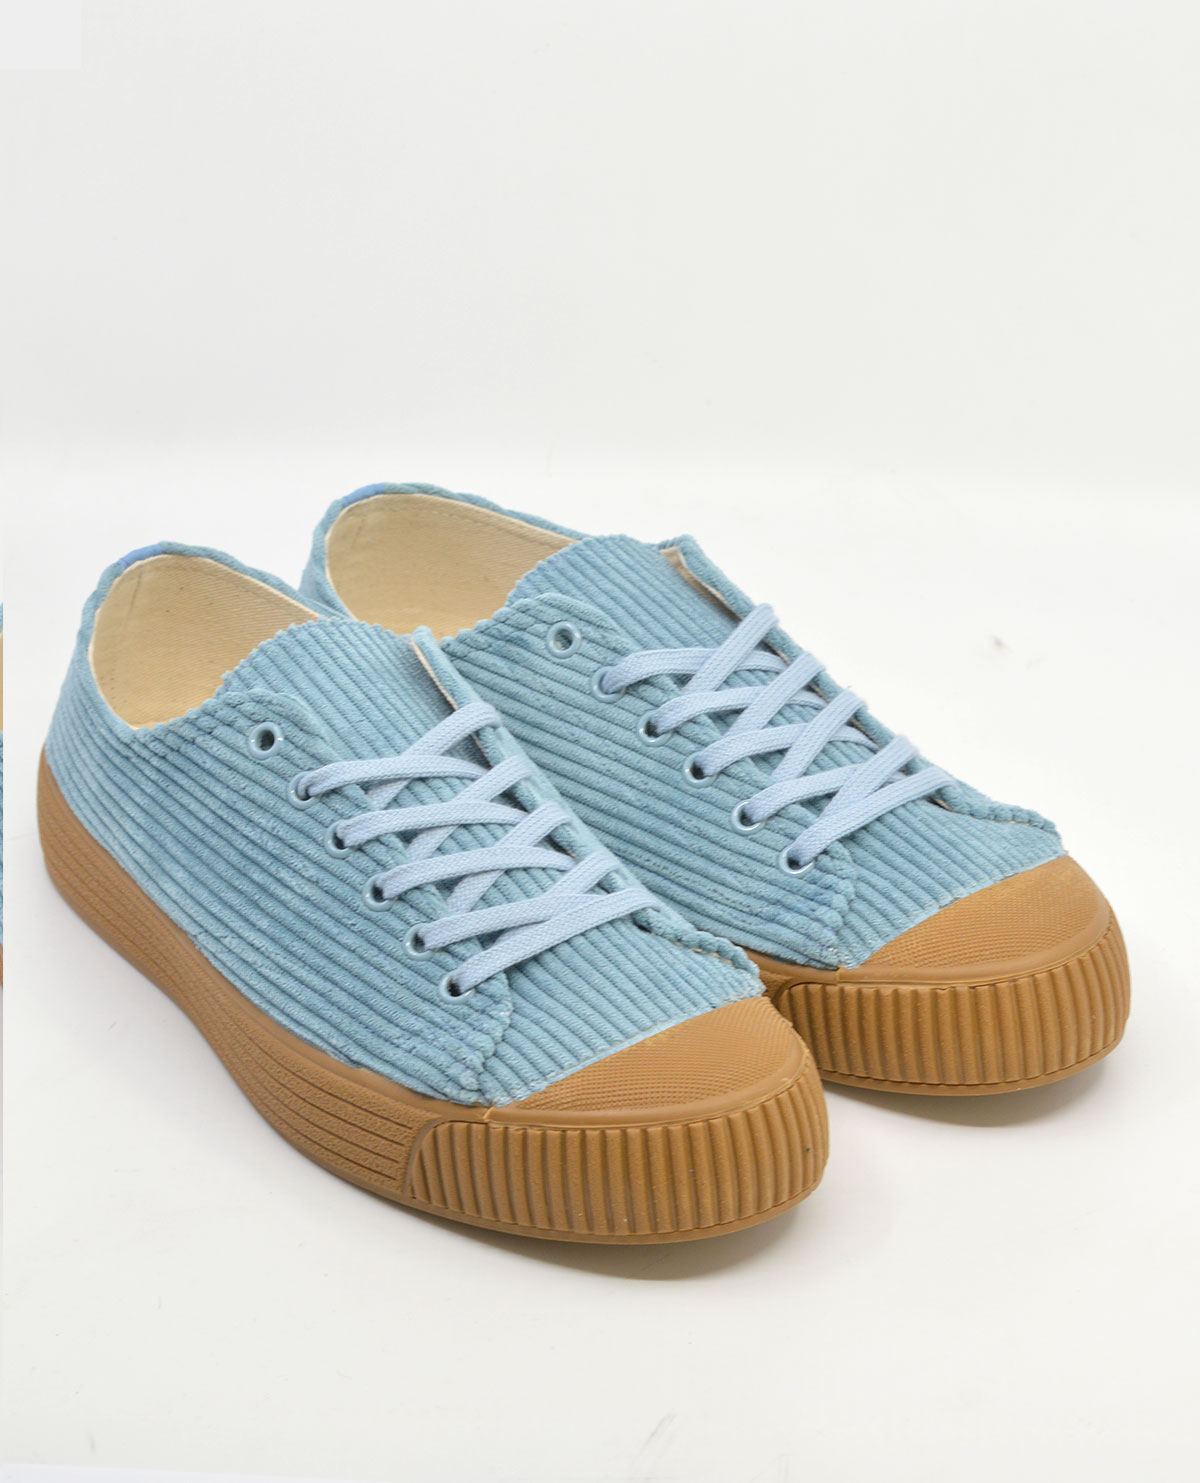 The “Mateo” Shoe In Sky Blue – Mod Shoes